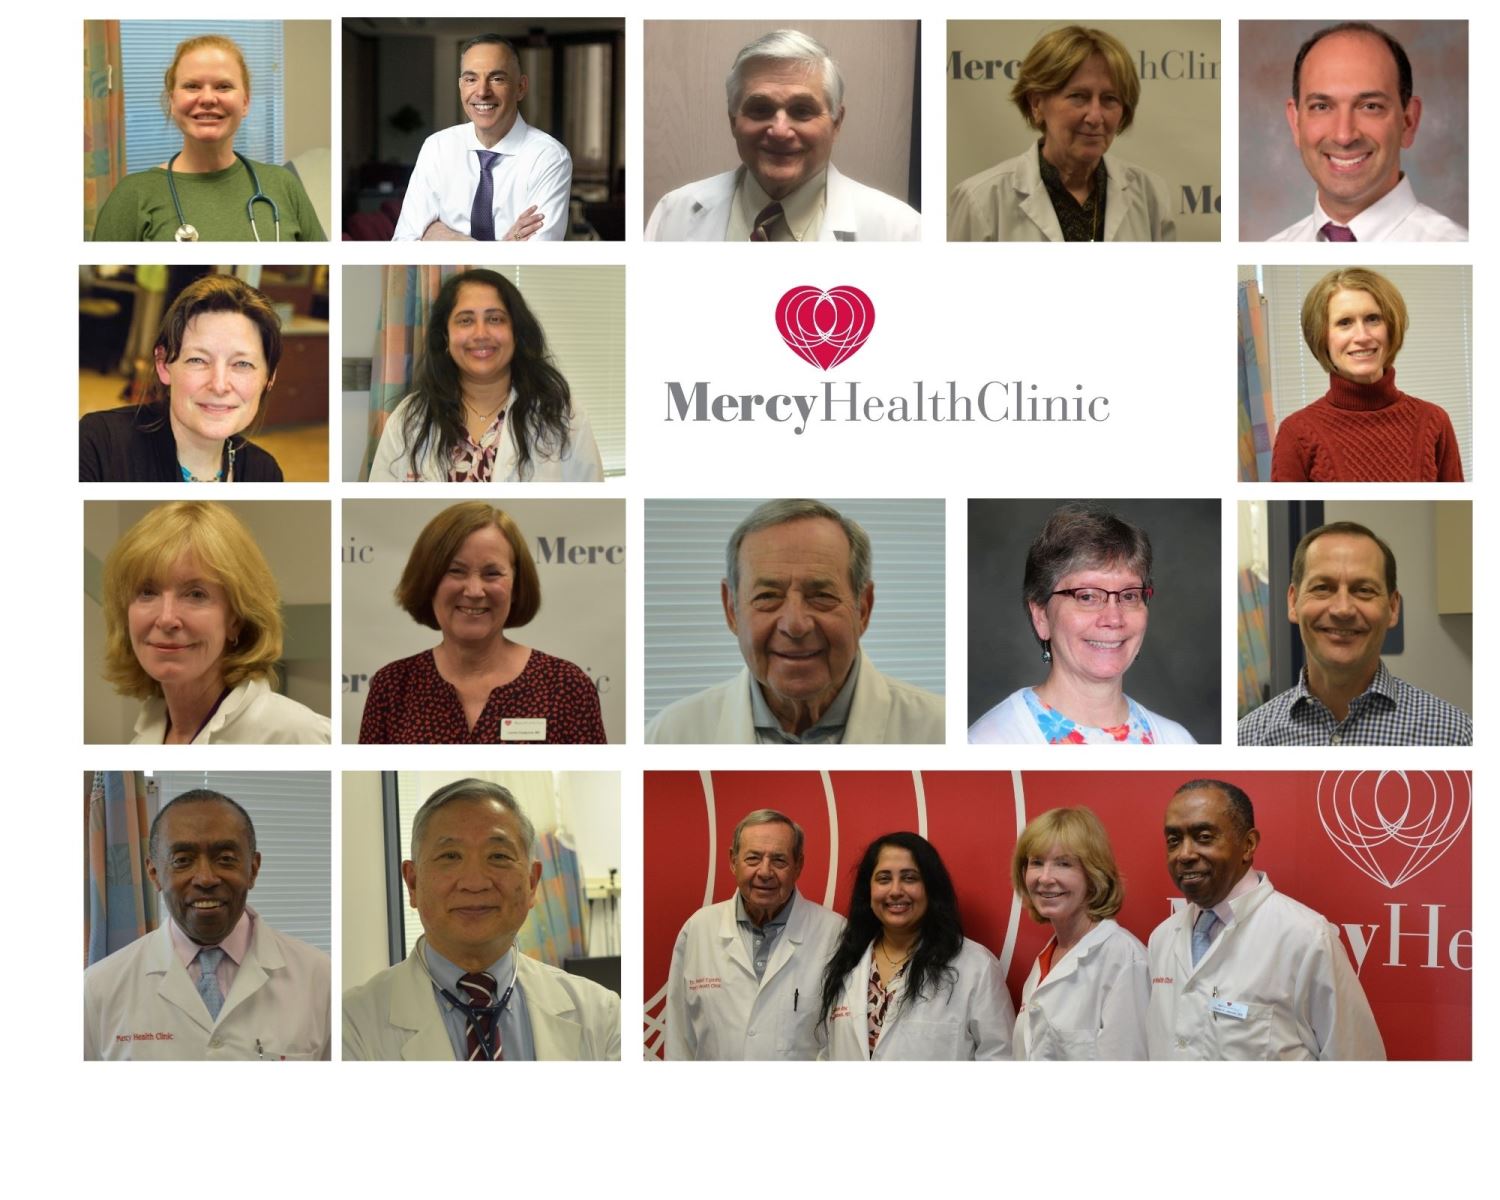 collage of Mercy HealthClinic photos